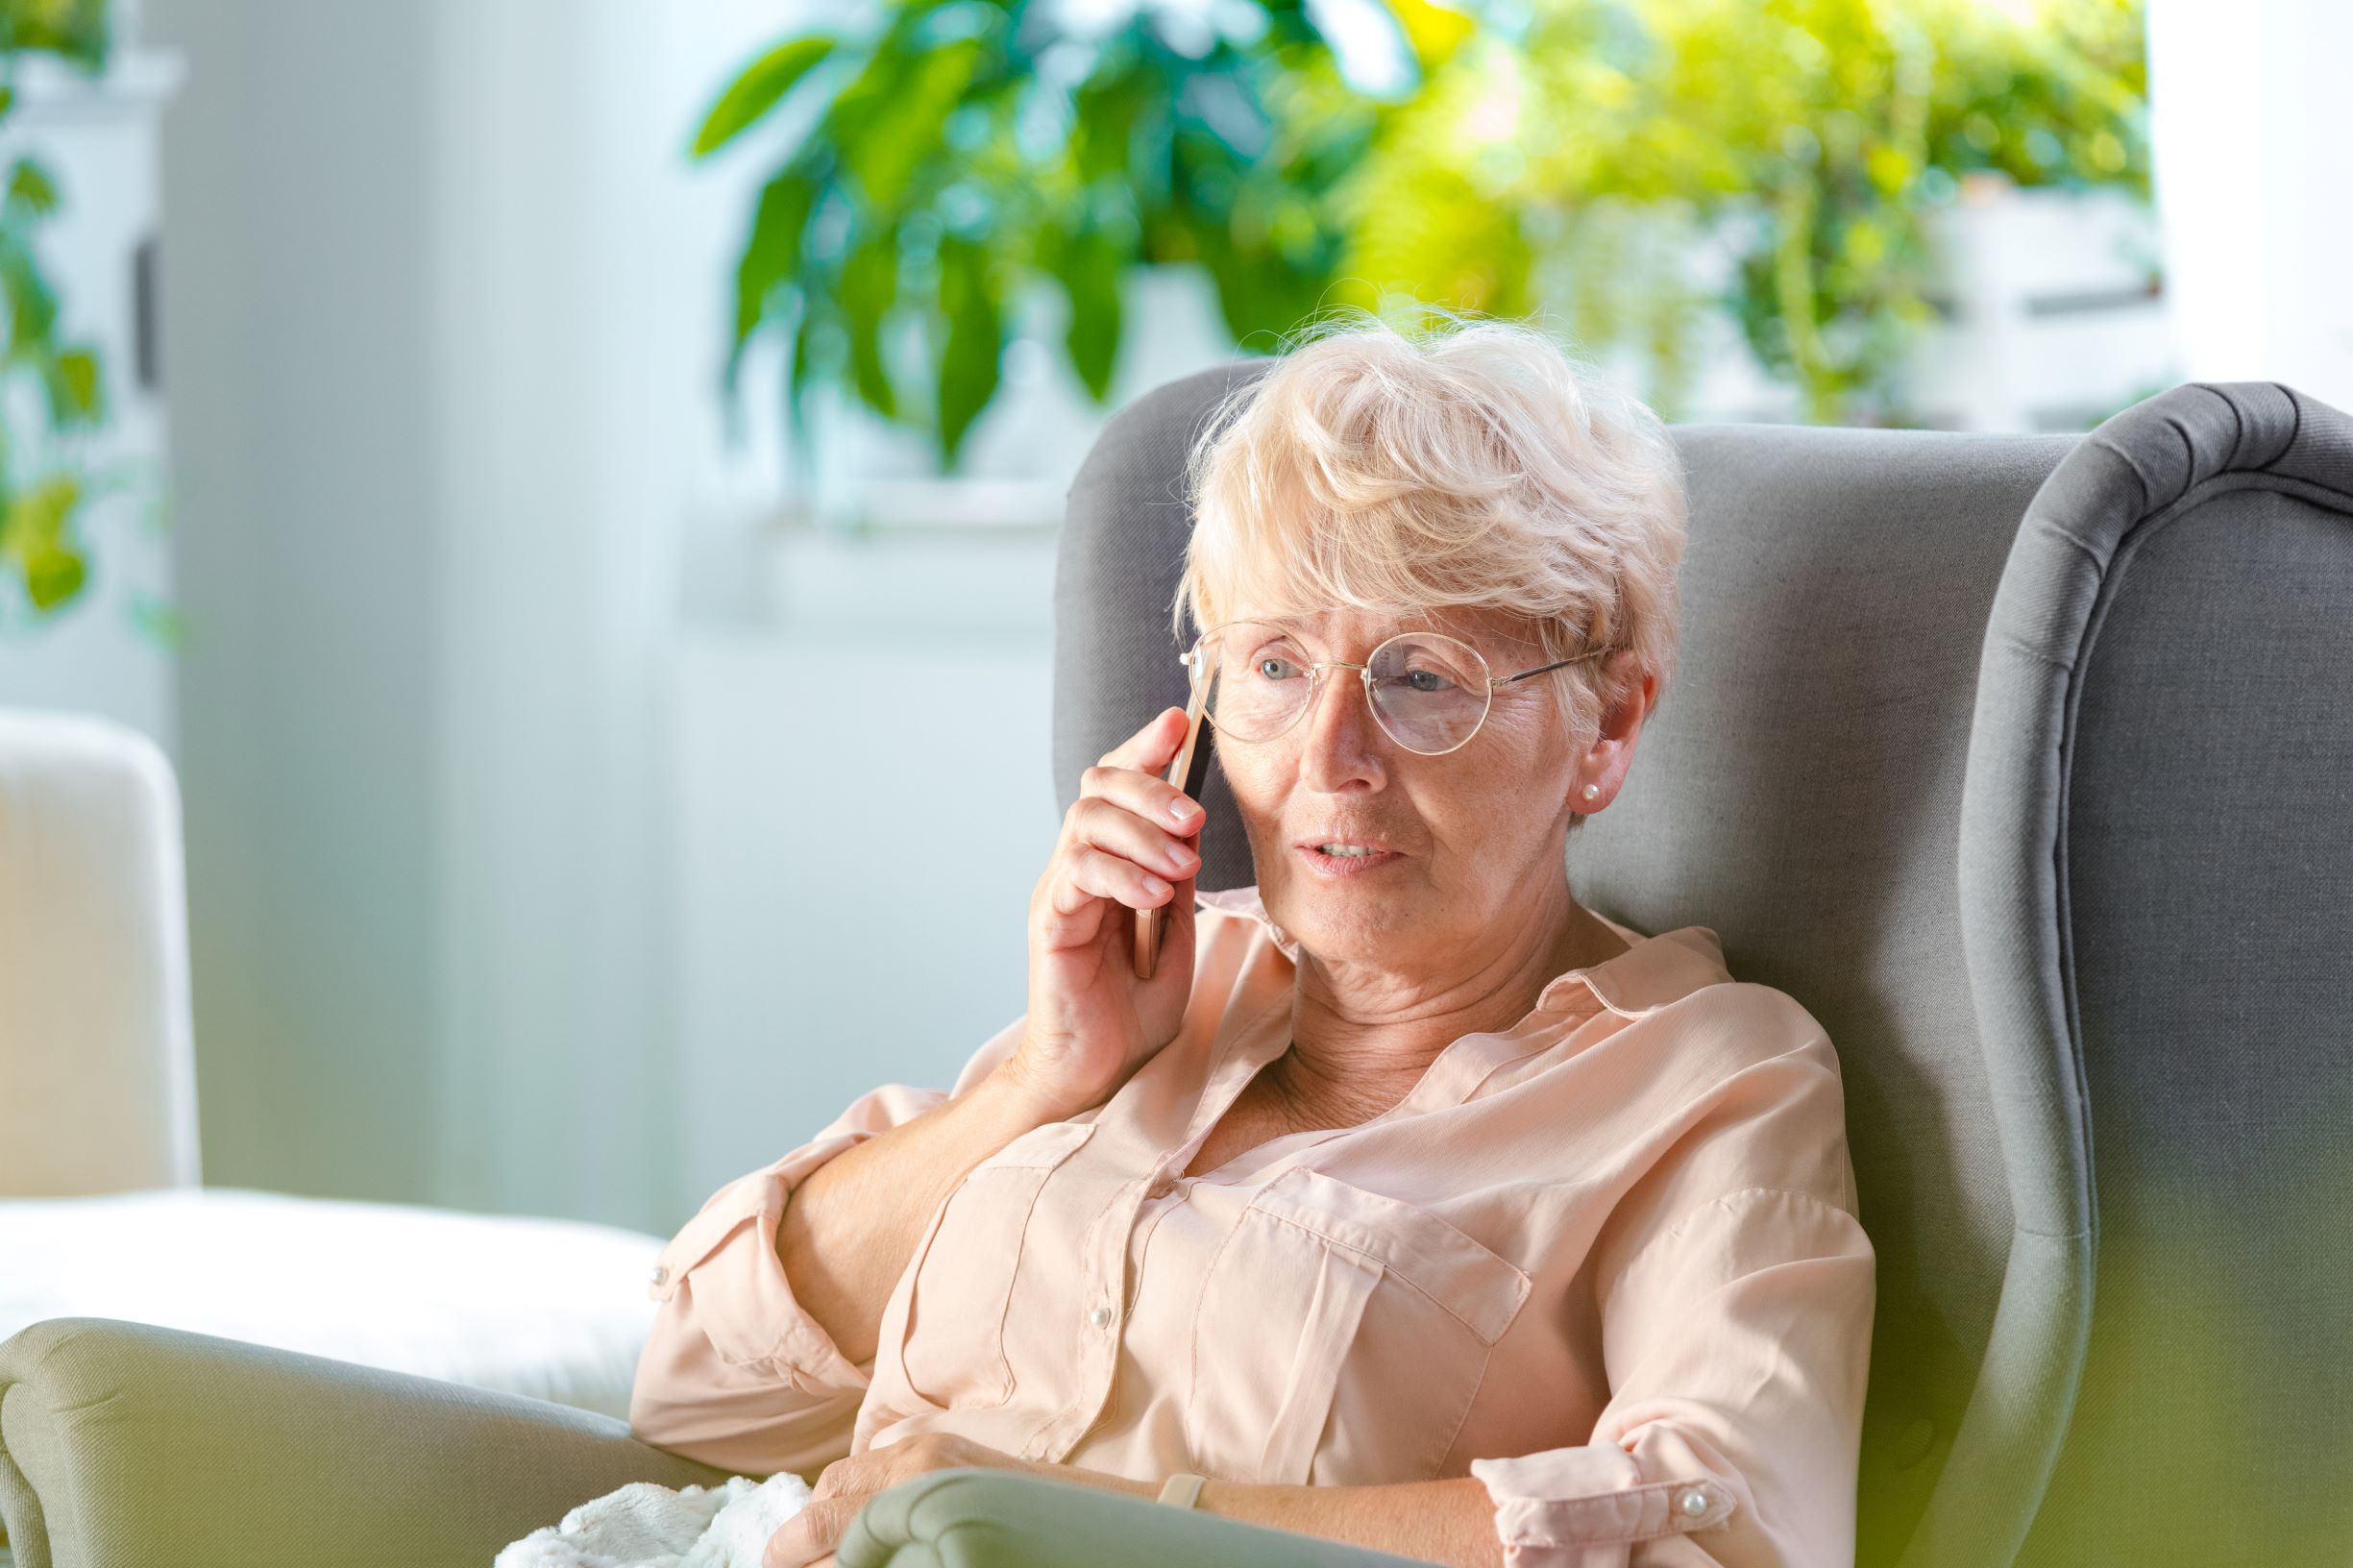 A senior woman focuses on her phone conversation. The relationship between hearing loss and cardiovascular health is well documented.